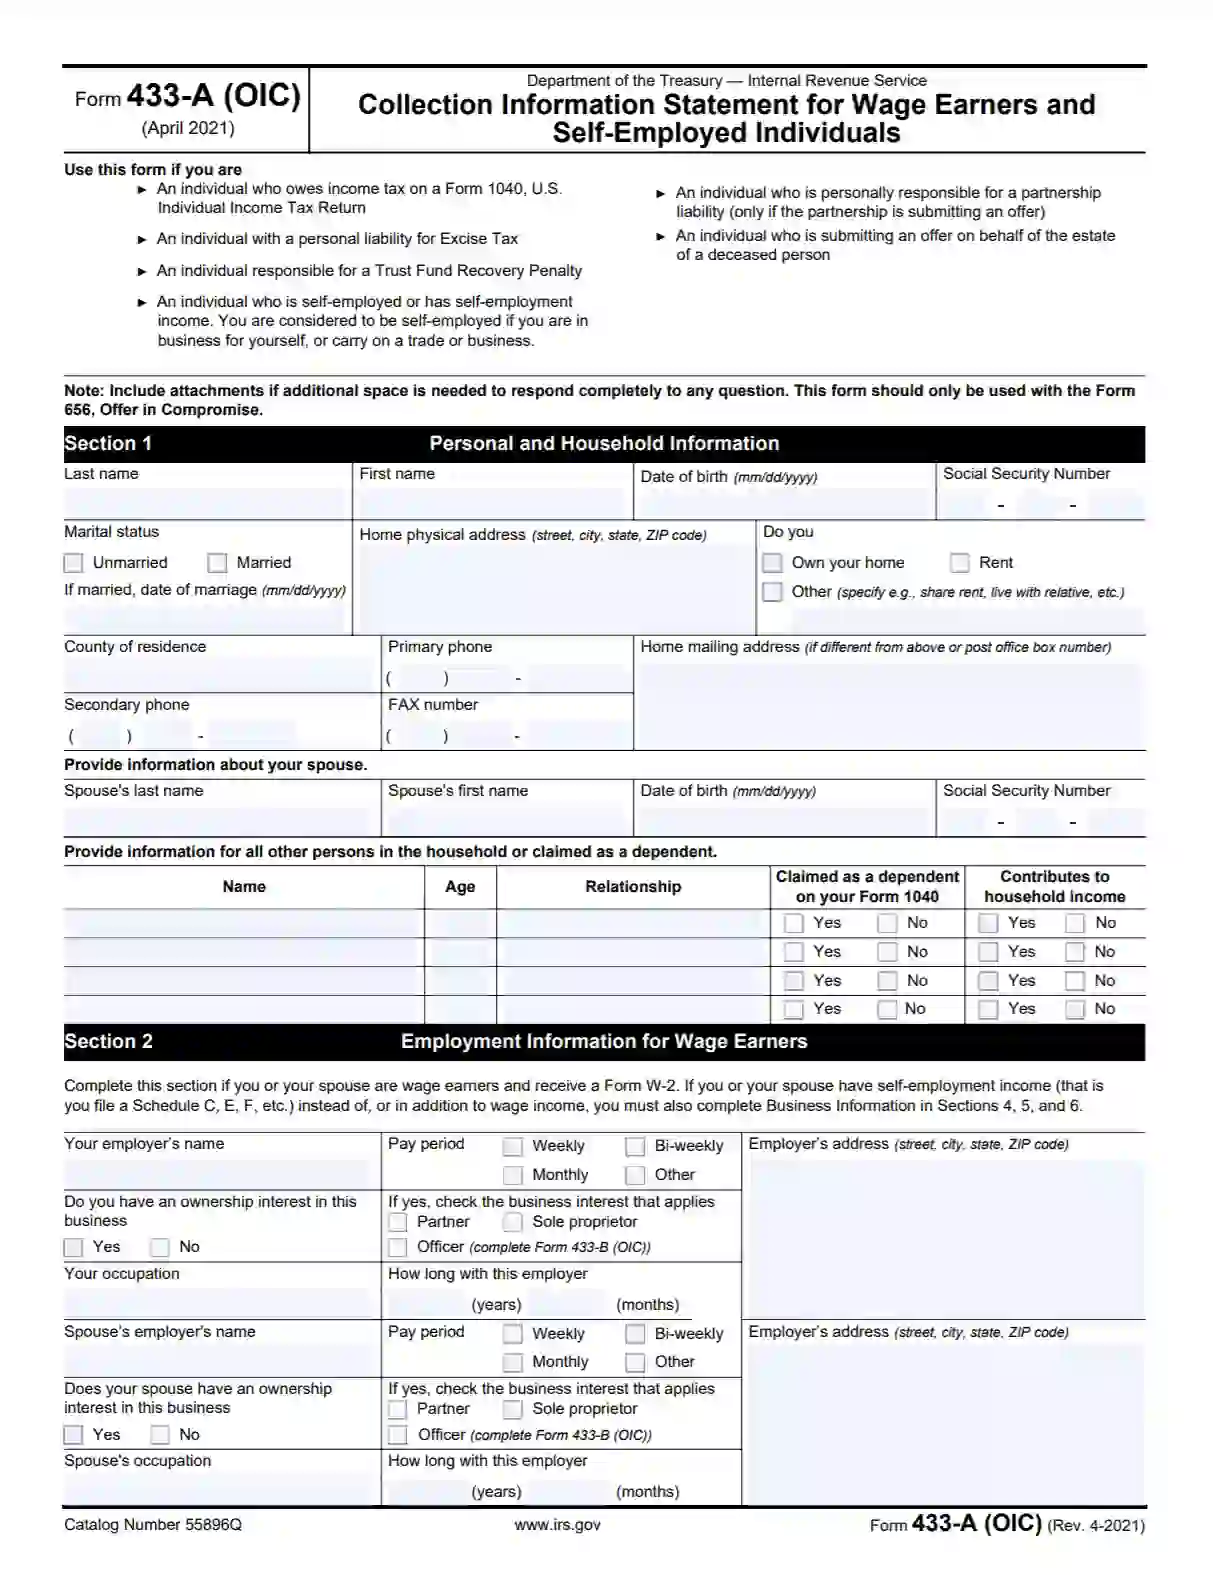 irs-form-433-a-(oic)-rev-04-2021